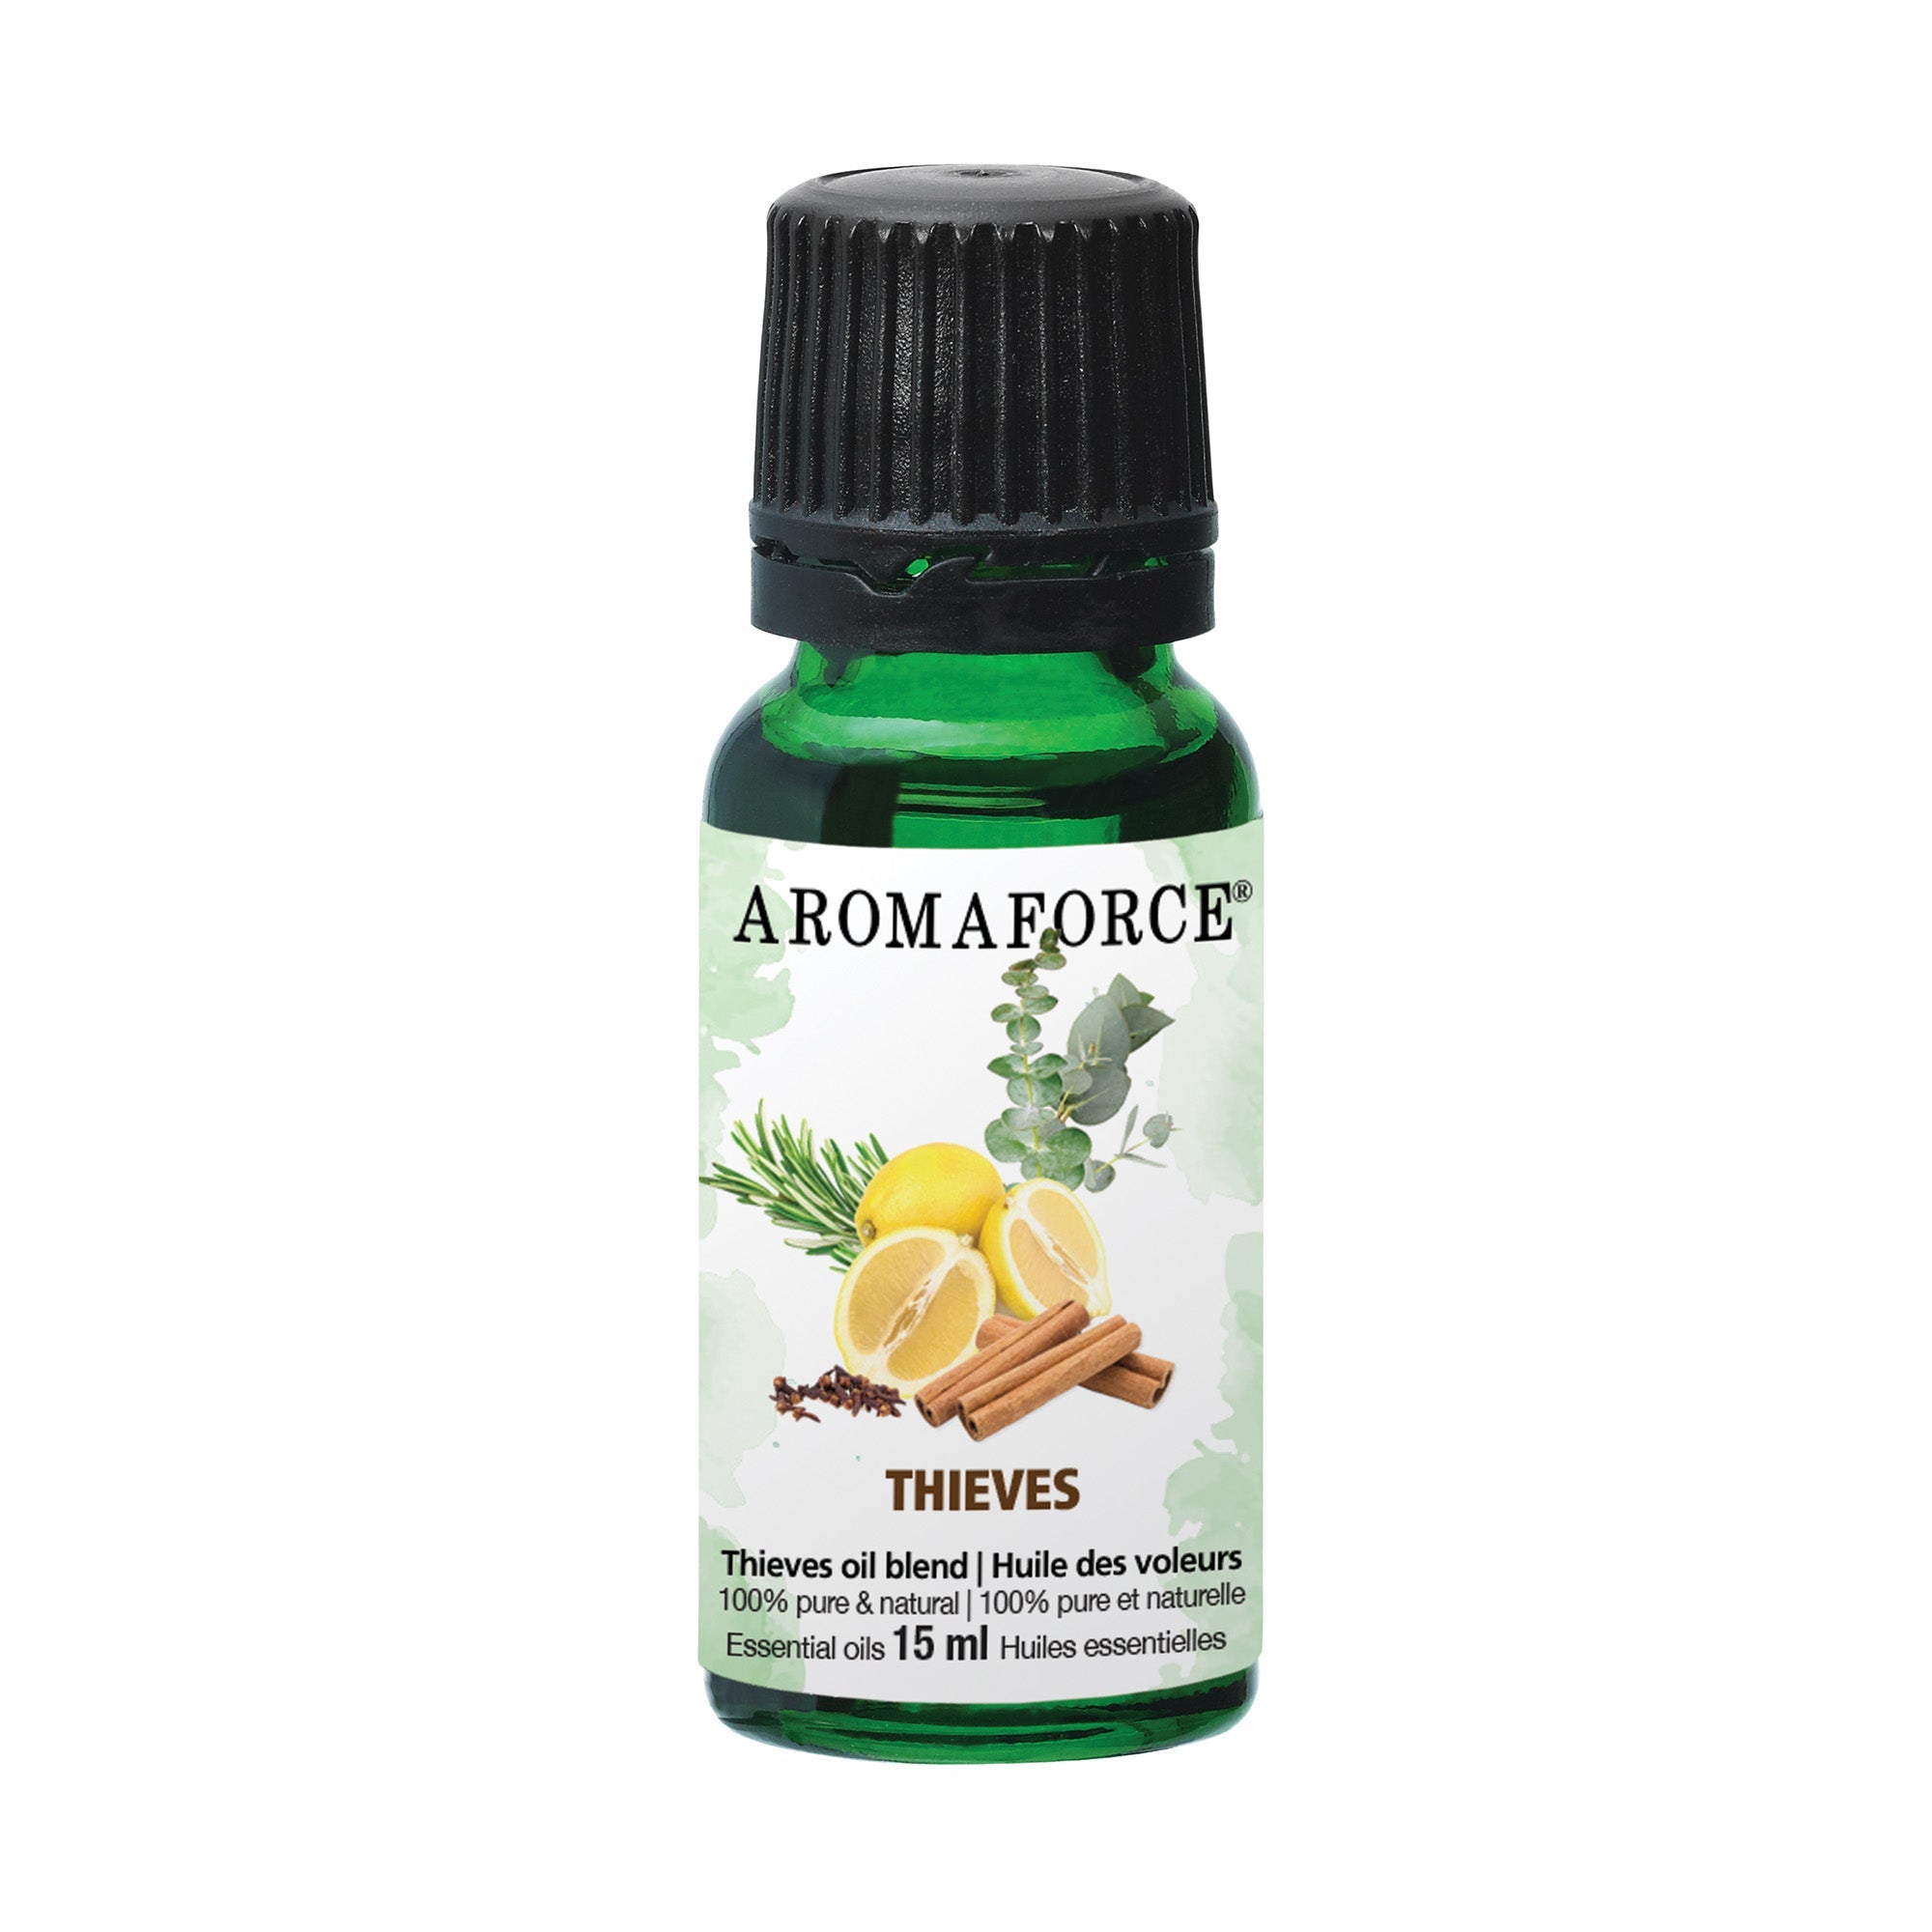 Thieves Oil Blend 100% Pure & Natural 15mL - Aromaforce - A.Vogel Canada